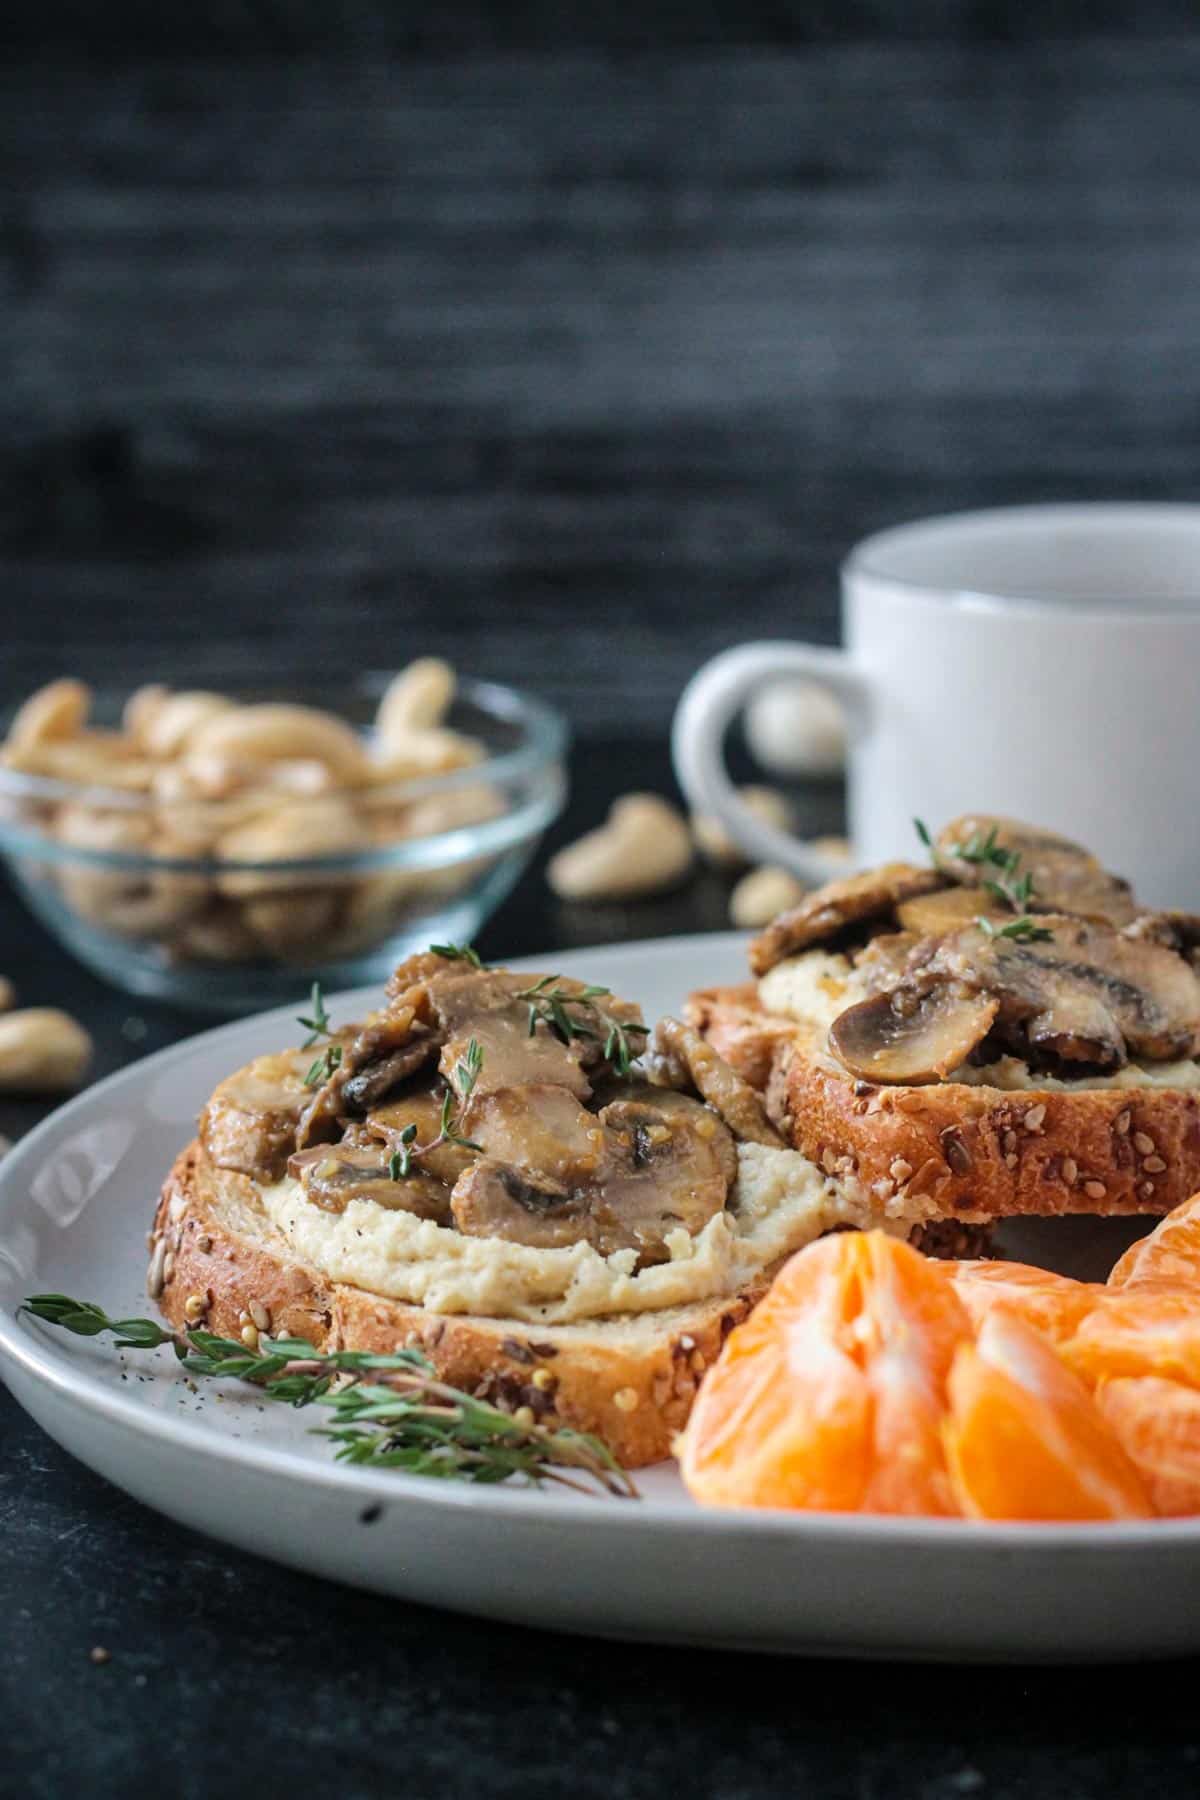 Plate of creamy vegan mushroom toast next to oranges and a cup of coffee.